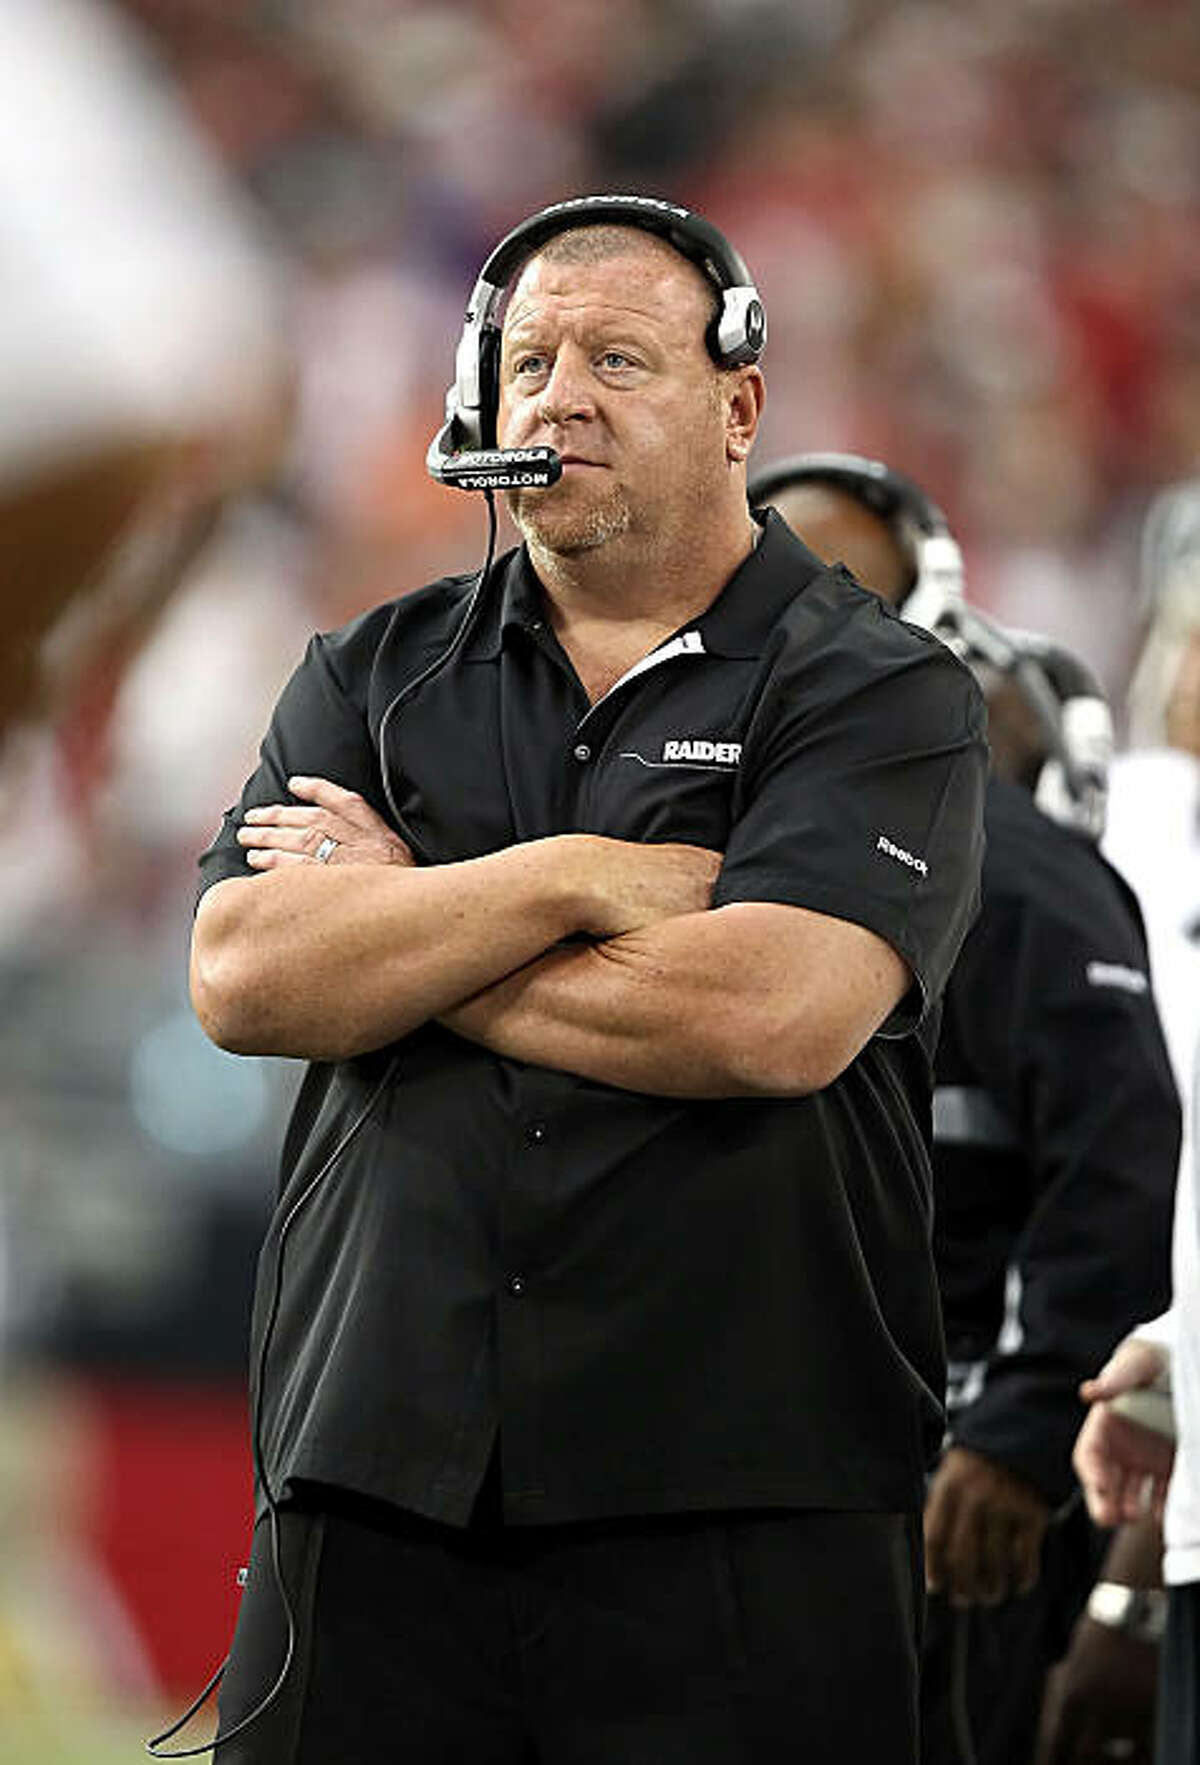 GLENDALE, AZ - SEPTEMBER 26: Head coach Tom Cable of the Oakland Raiders stands on the sidelines during the NFL game against the Arizona Cardinals at the University of Phoenix Stadium on September 26, 2010 in Glendale, Arizona. The Cardinals defeated the Raiders 24-23. (Photo by Christian Petersen/Getty Images)